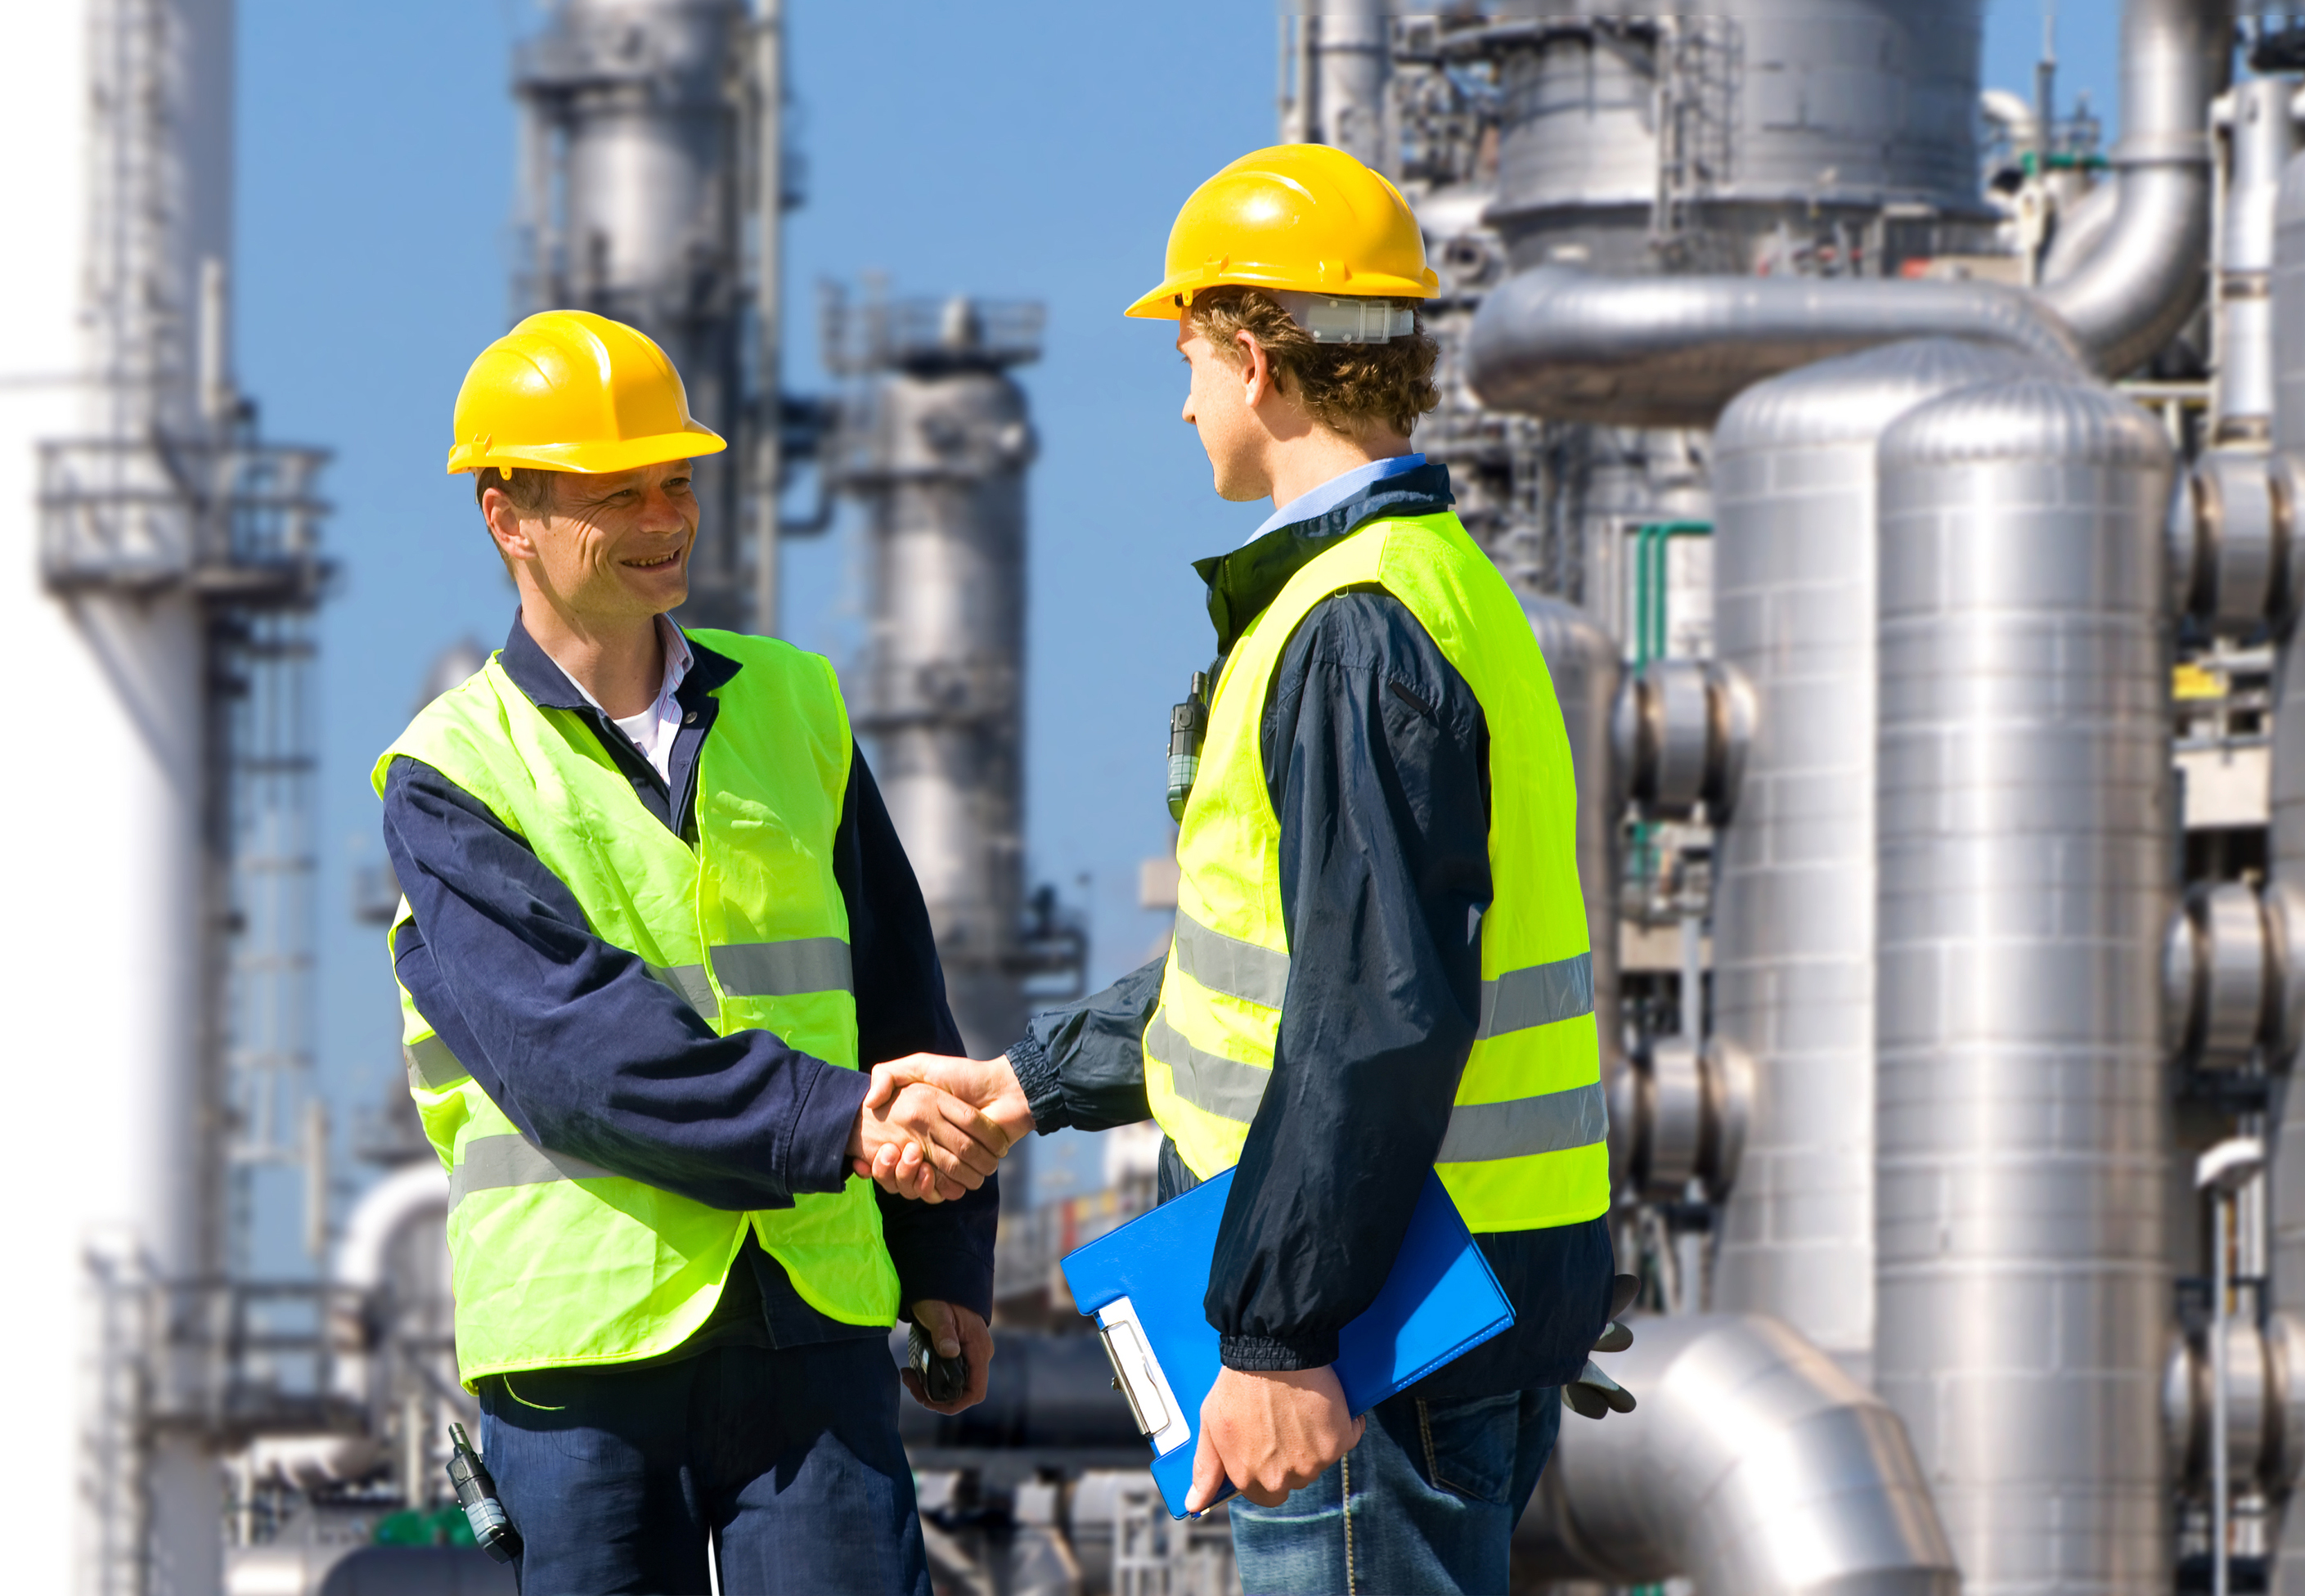 Two petrochemical contractors closing a deal in front of an oil refinary